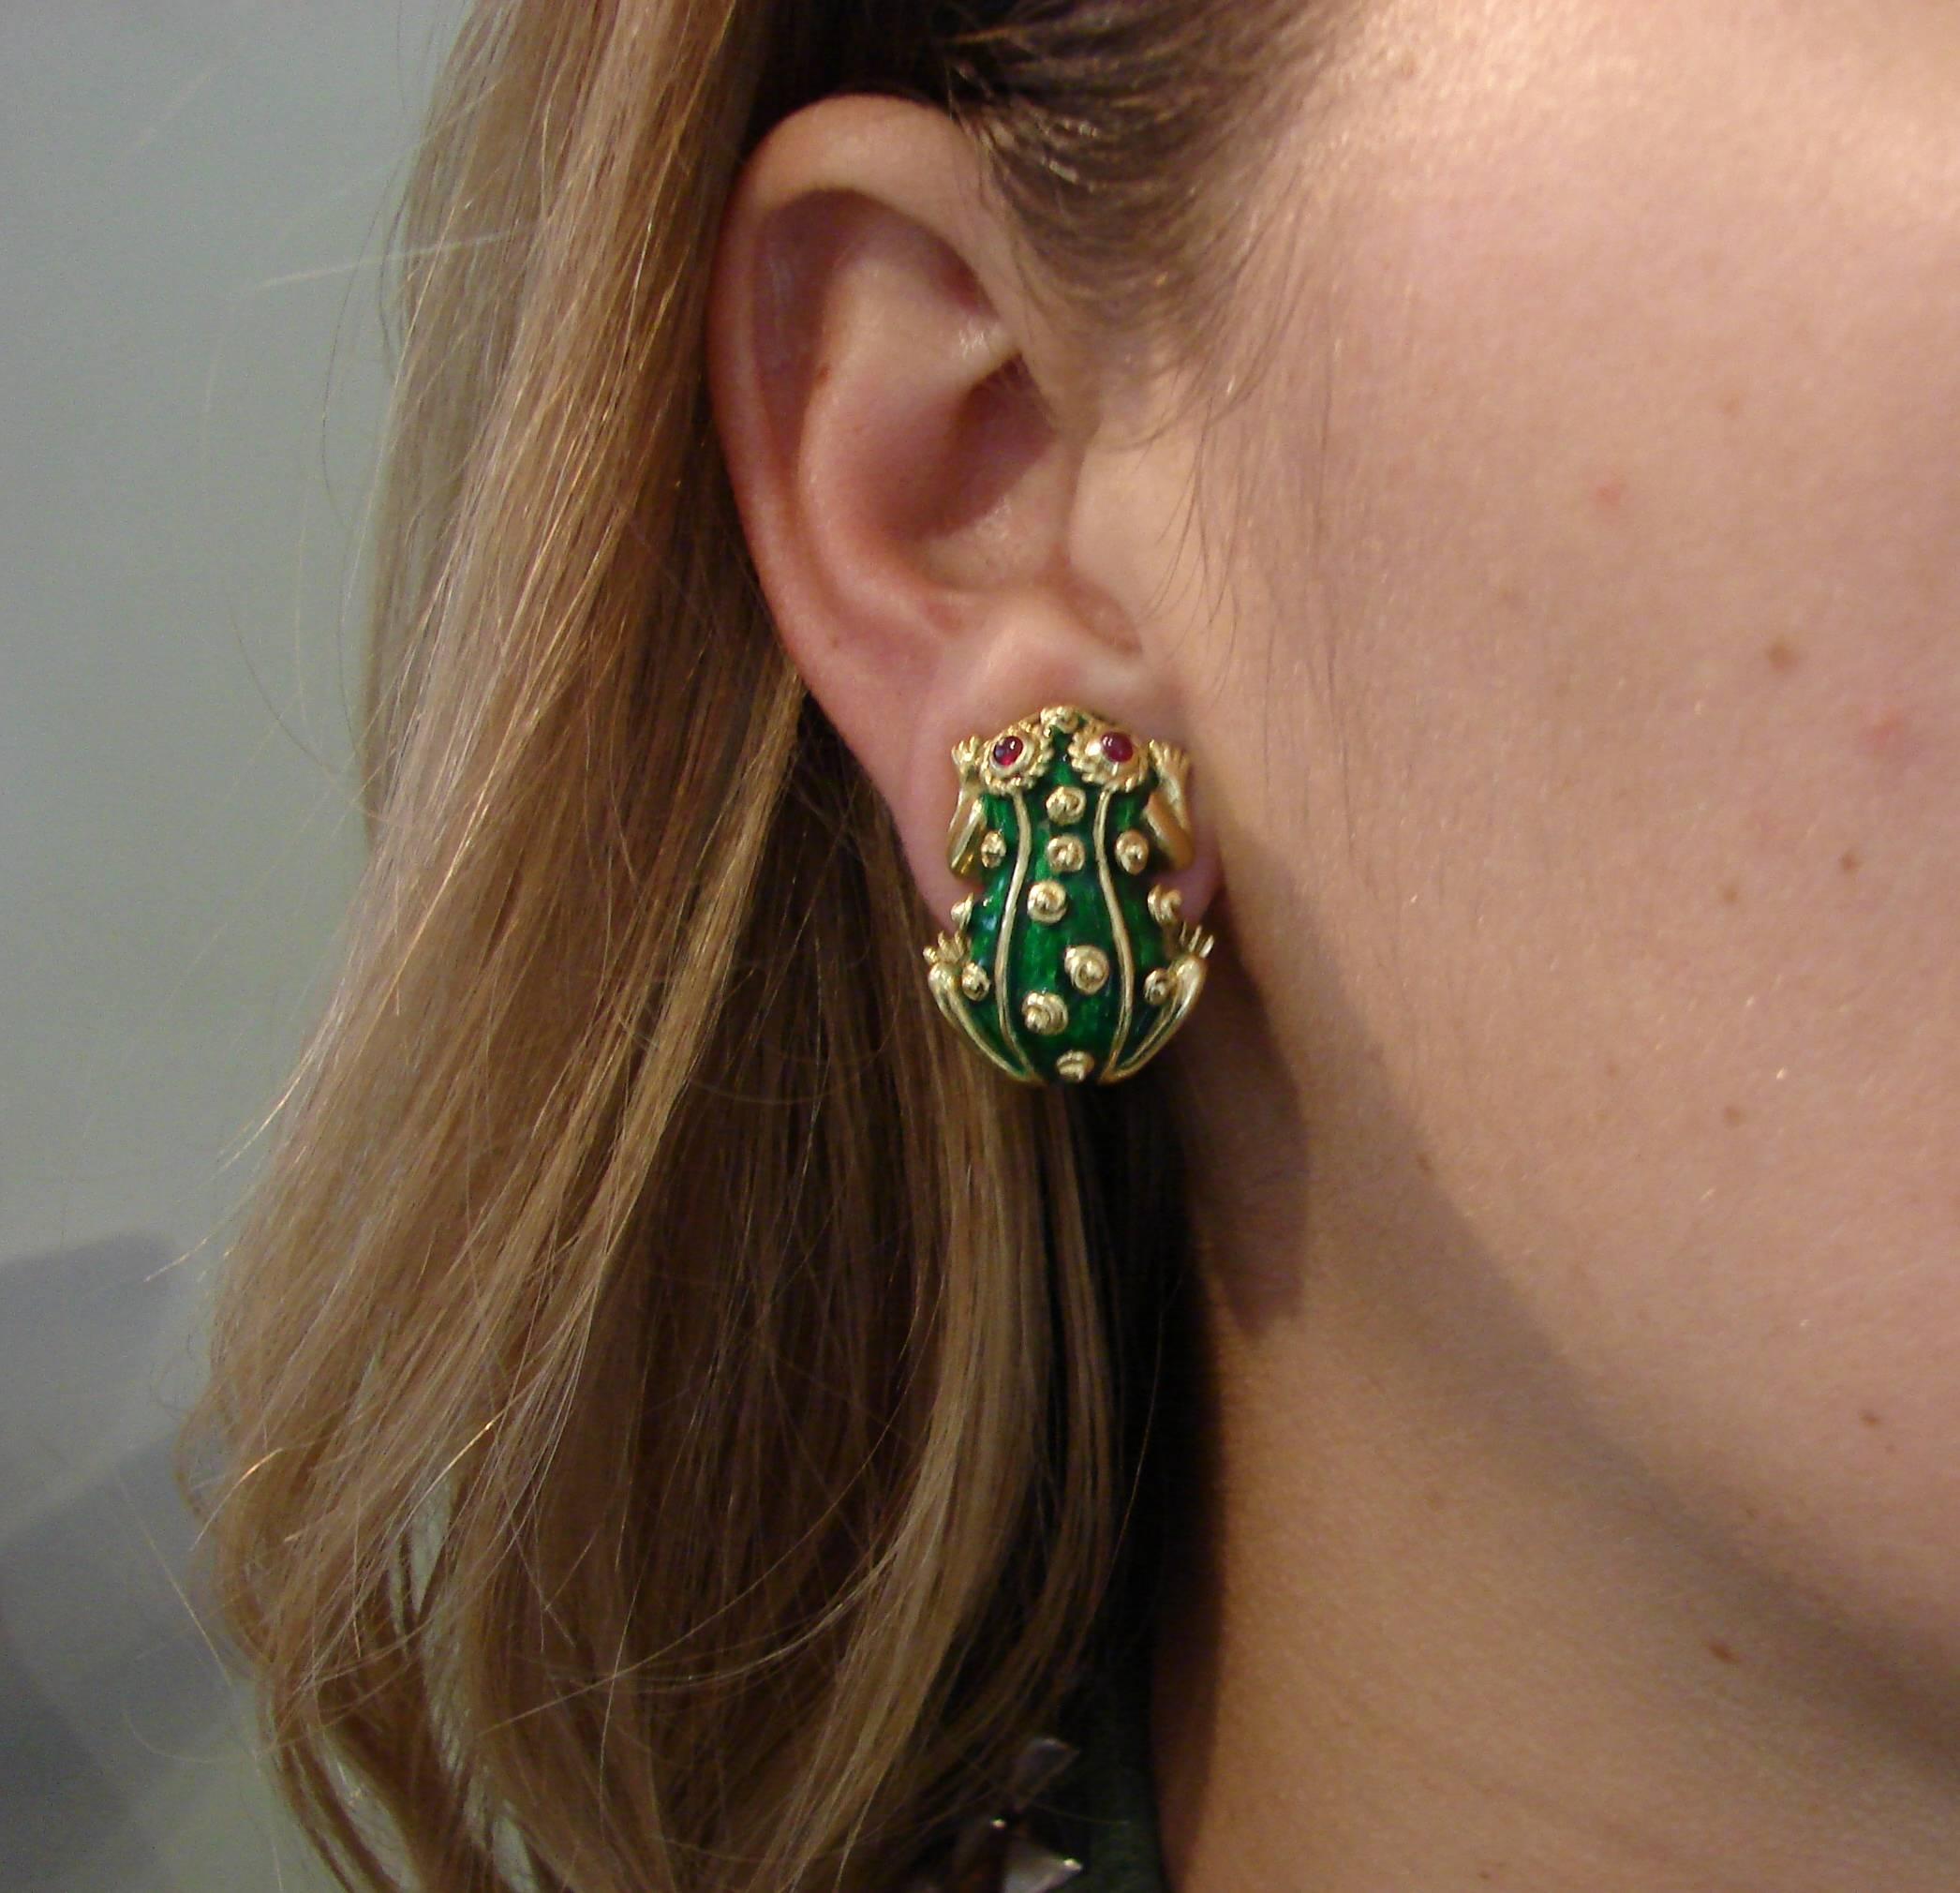 Signature David Webb frog earrings created in the 1980's. Bold and extravagant yet wearable, the earrings are a great addition to your jewelry collection and will accentuate your fun-loving personality. 
Made of 18 karat yellow gold and green enamel